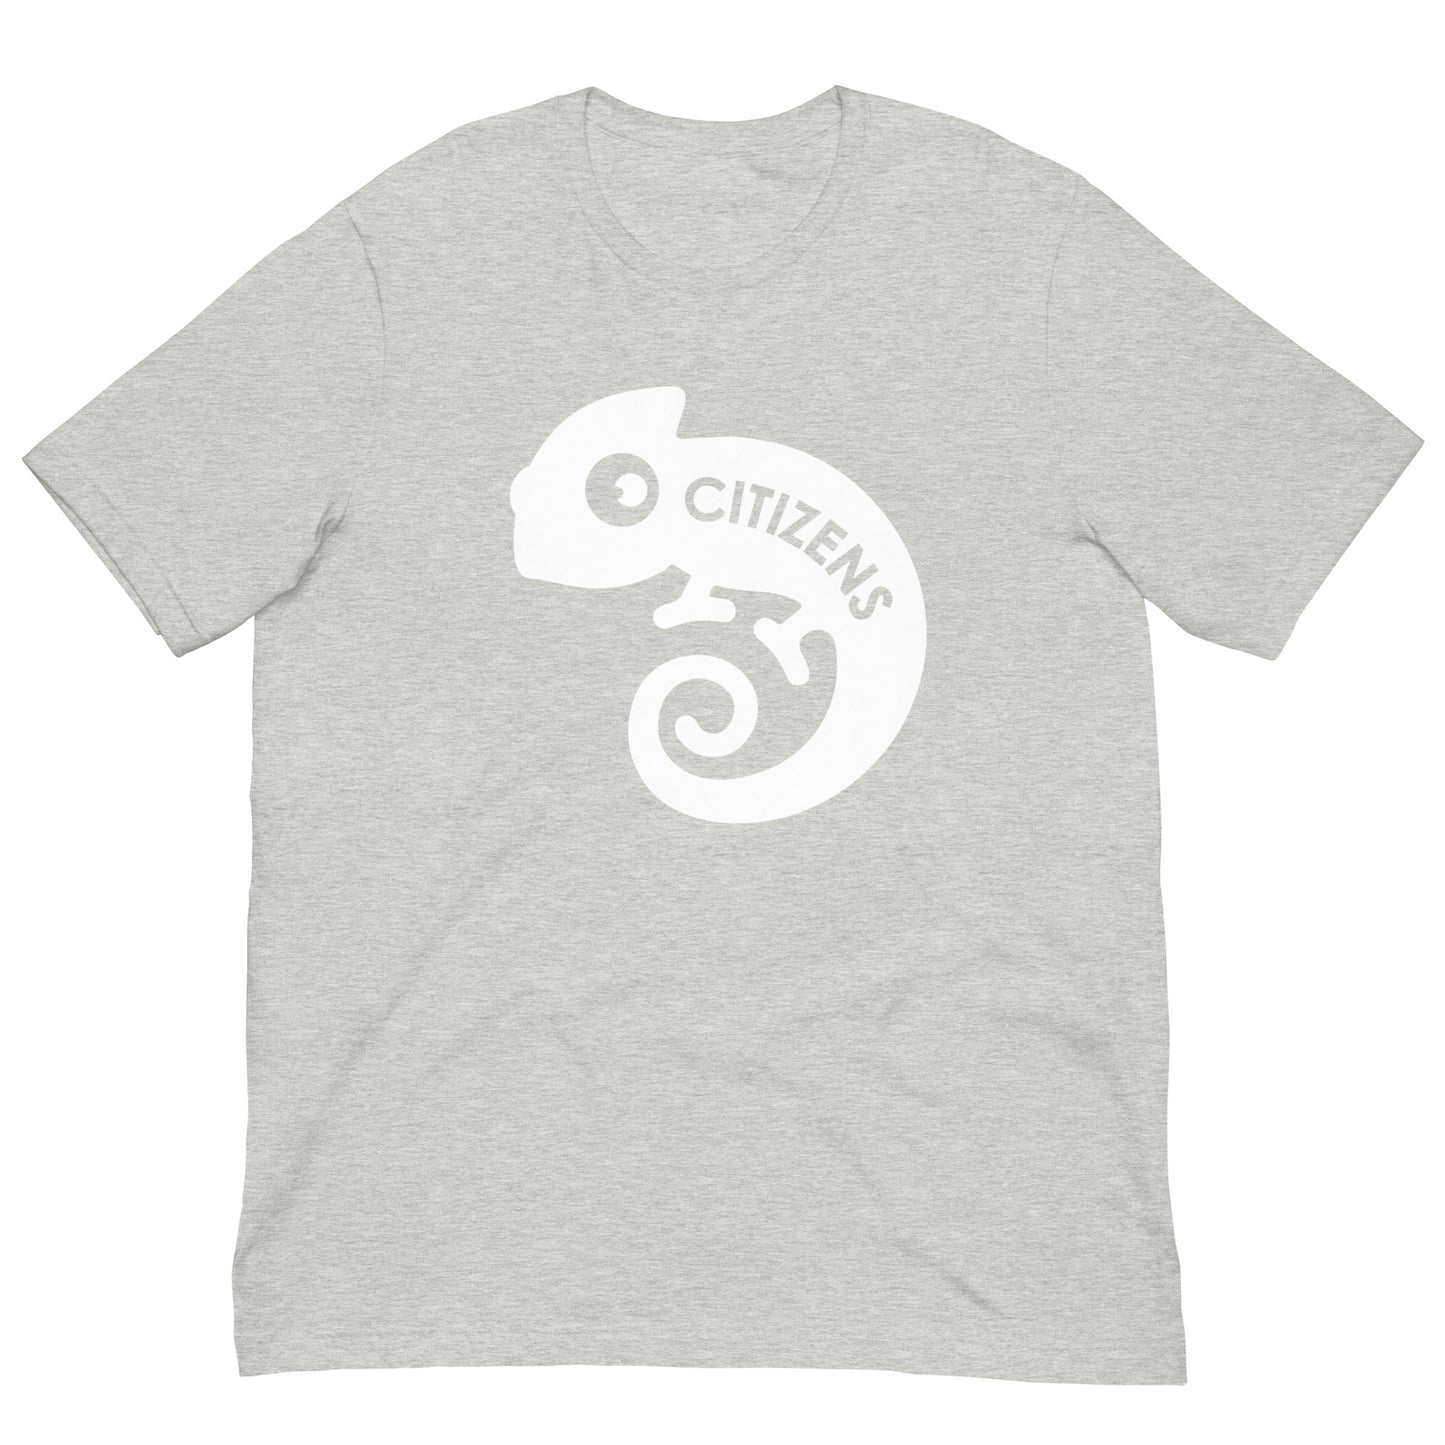 Citizens of the World White Logo Adult T-Shirt